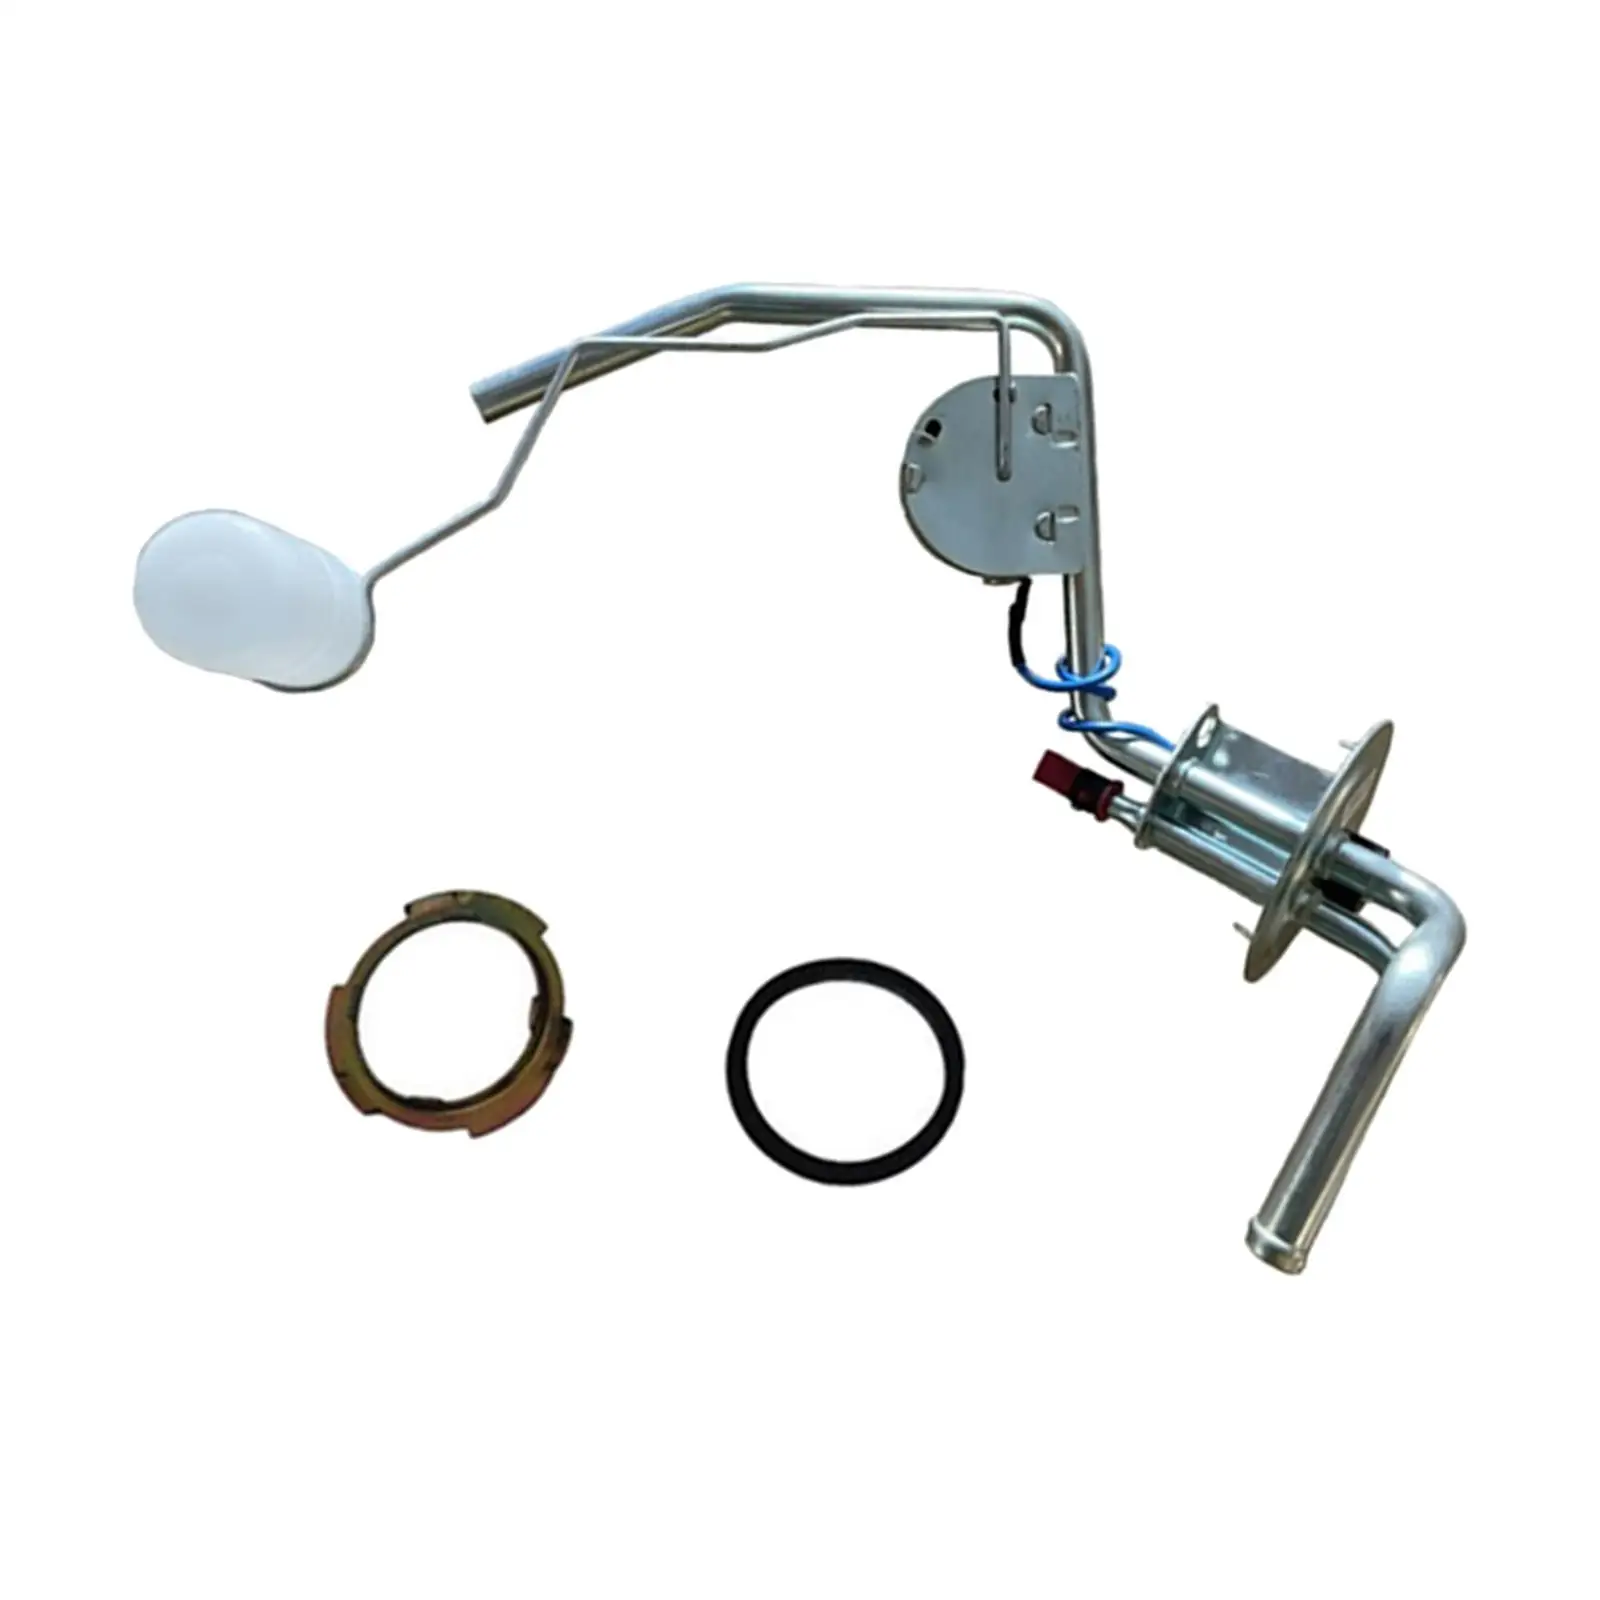 Rear Fuel Tank Sending Unit Replacement for F250 F350 Easy to Install Advanced manufacturing technology